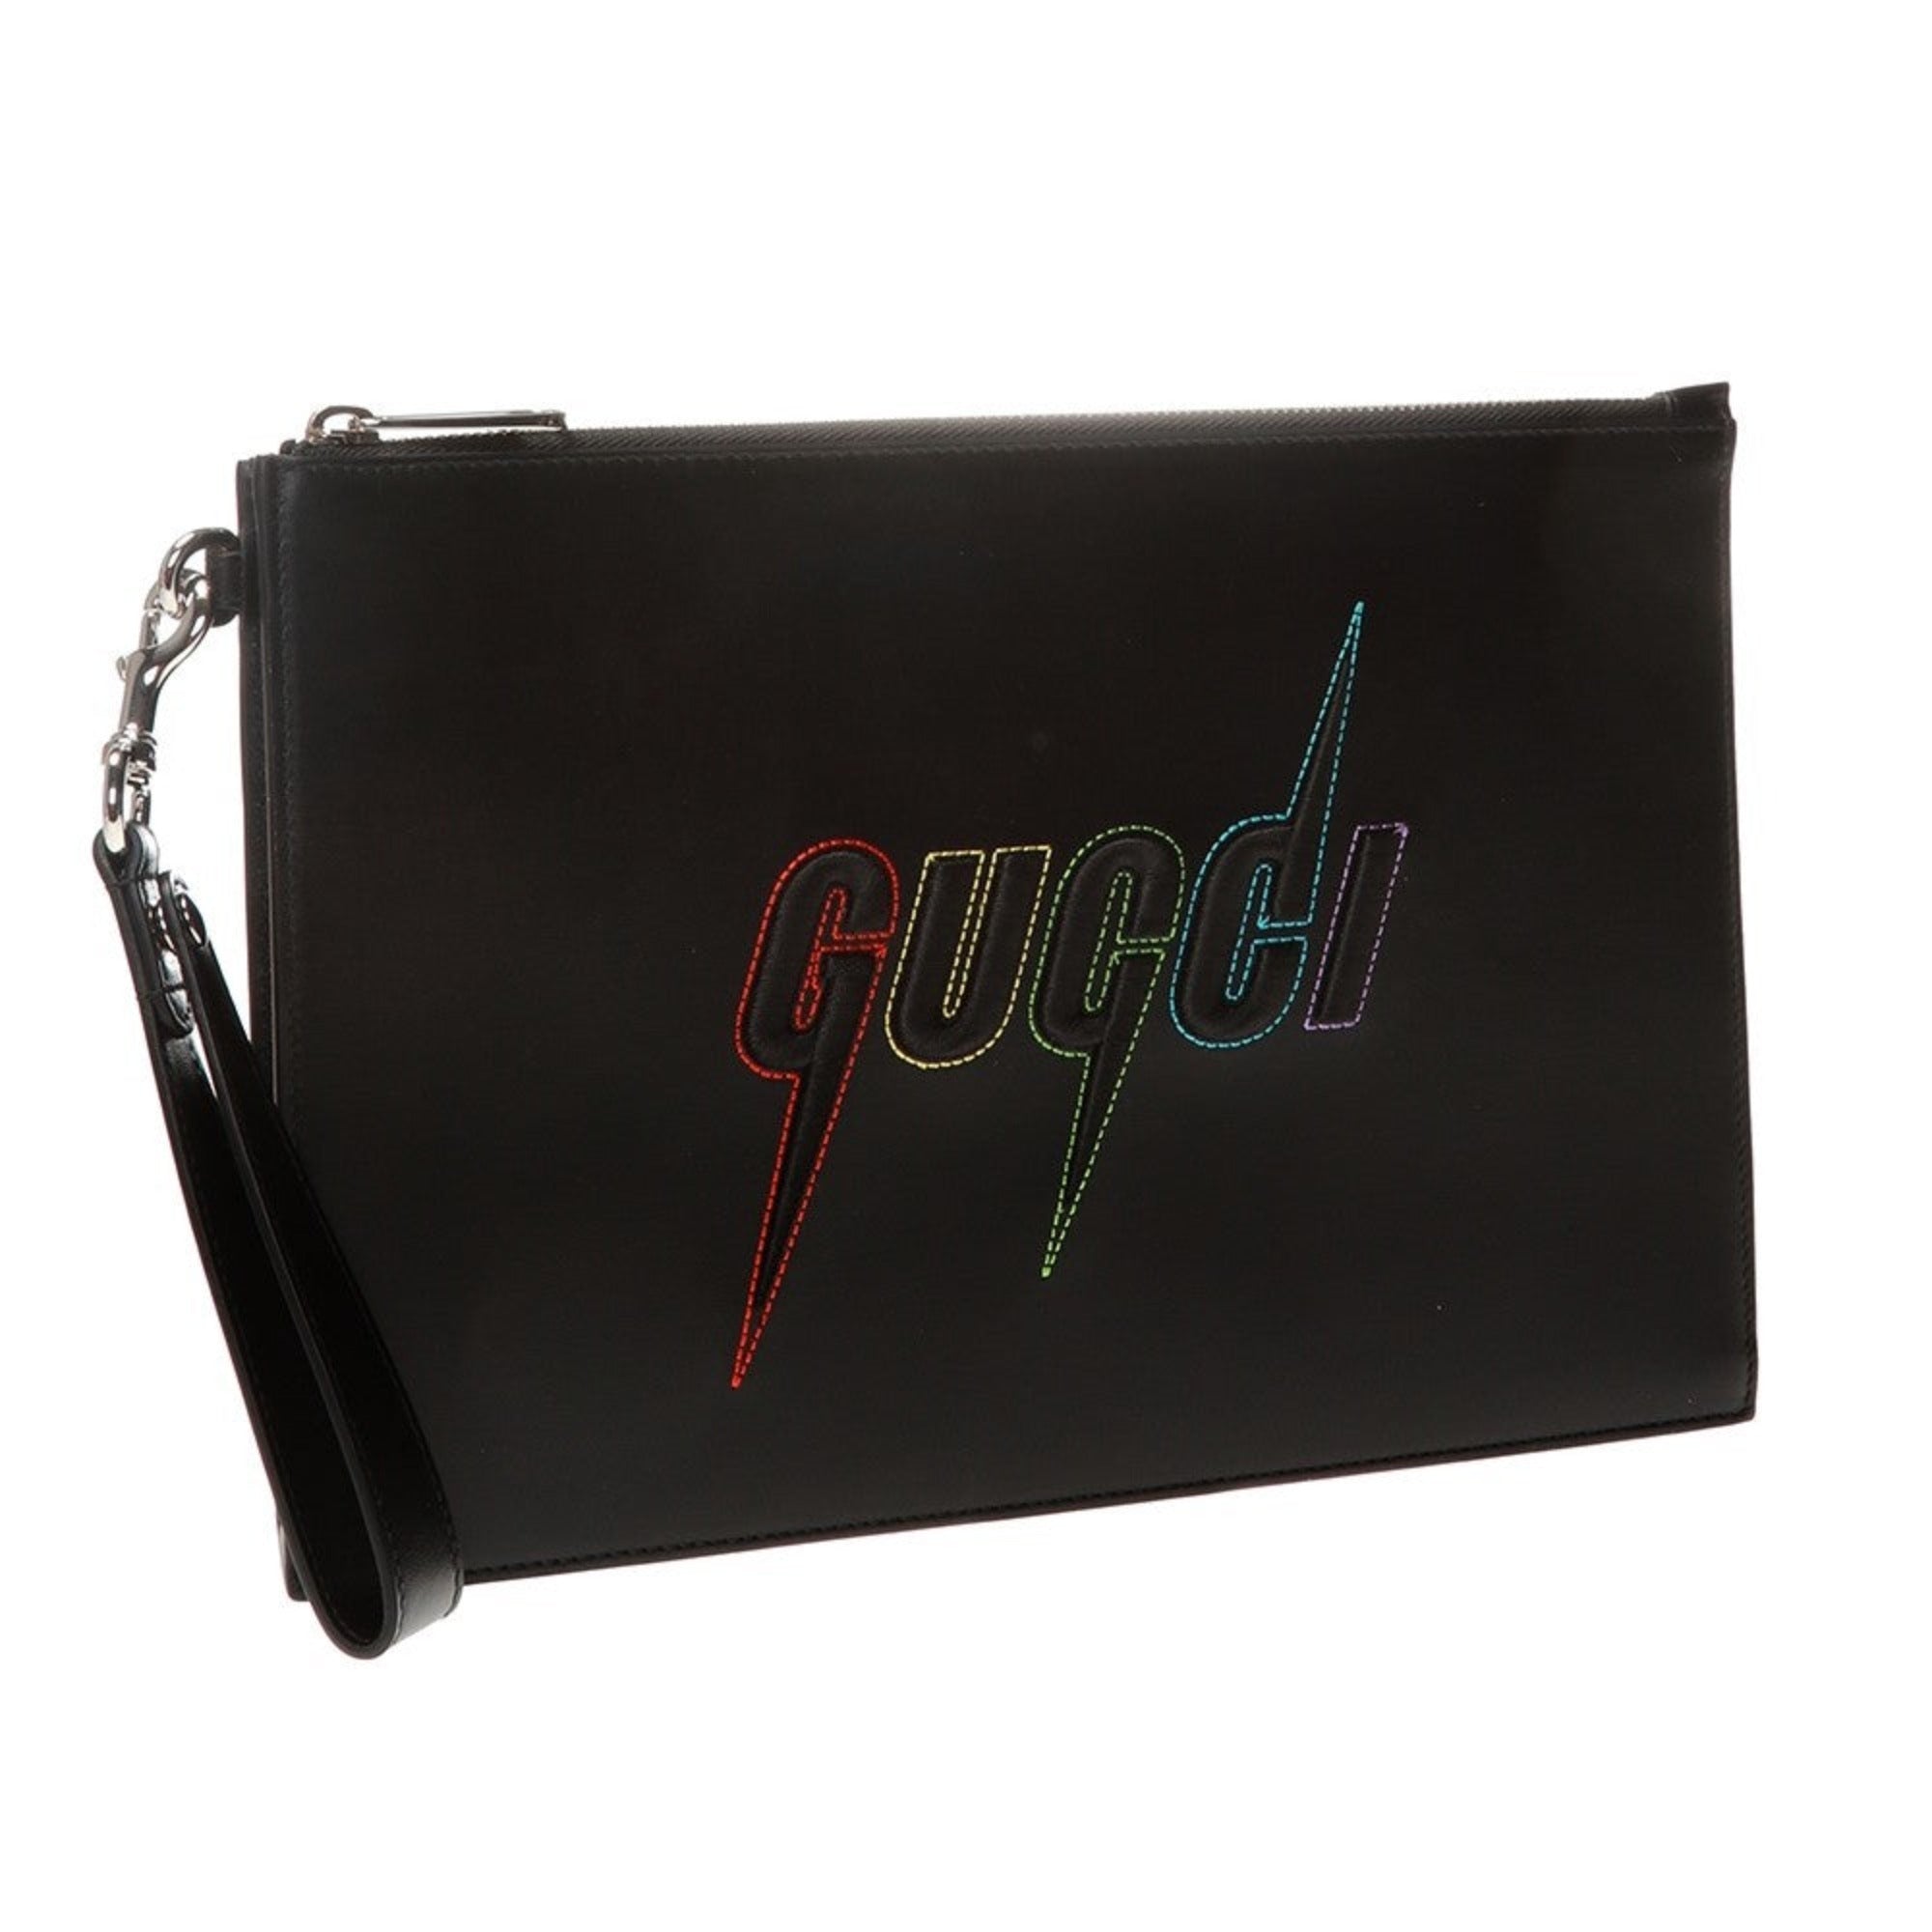 Gucci Blade Embroidered Black Leather Pouch Wristlet Bag 597678 at_Queen_Bee_of_Beverly_Hills